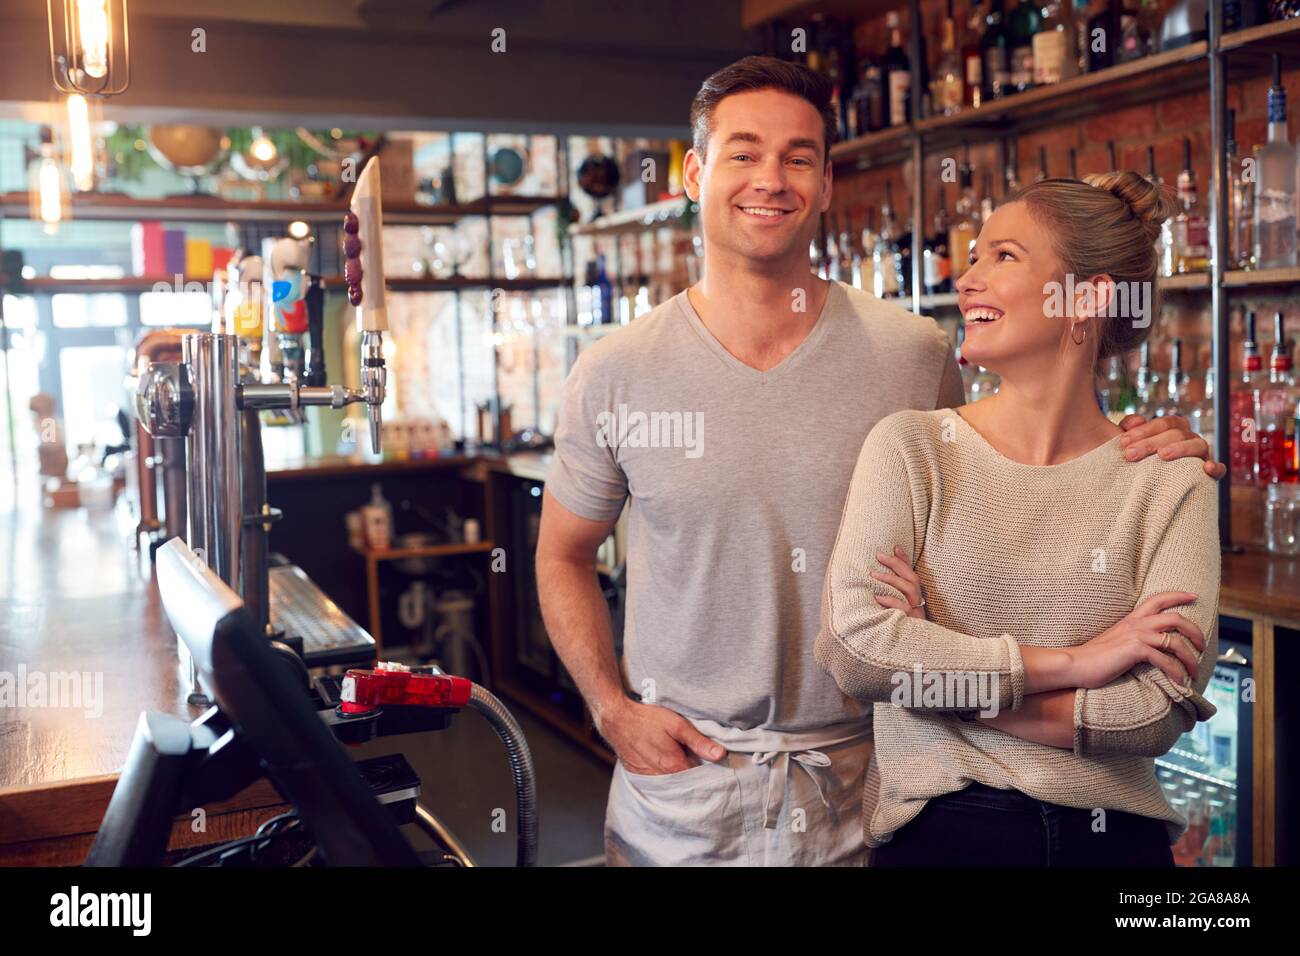 Portrait Of Smiling Couple Owning Bar Standing Behind Counter Stock Photo